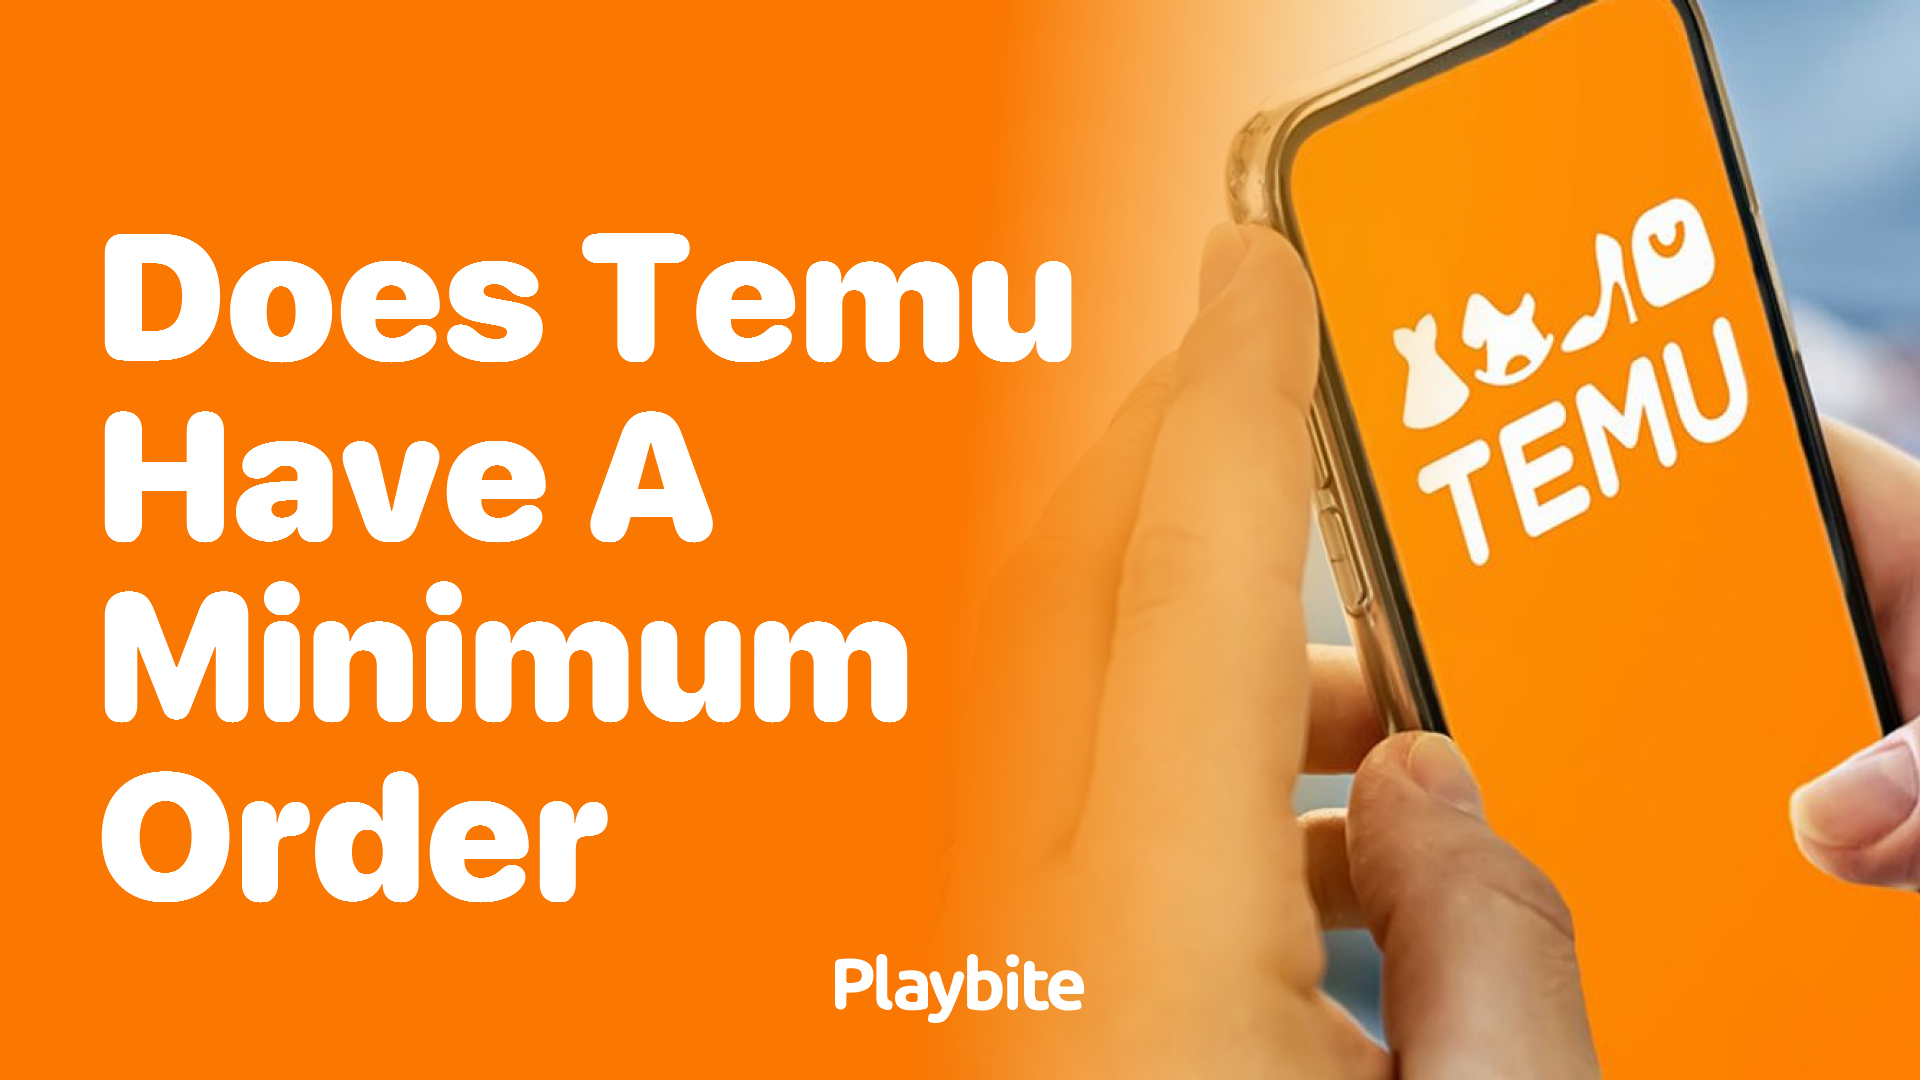 Does Temu Have a Minimum Order Requirement?